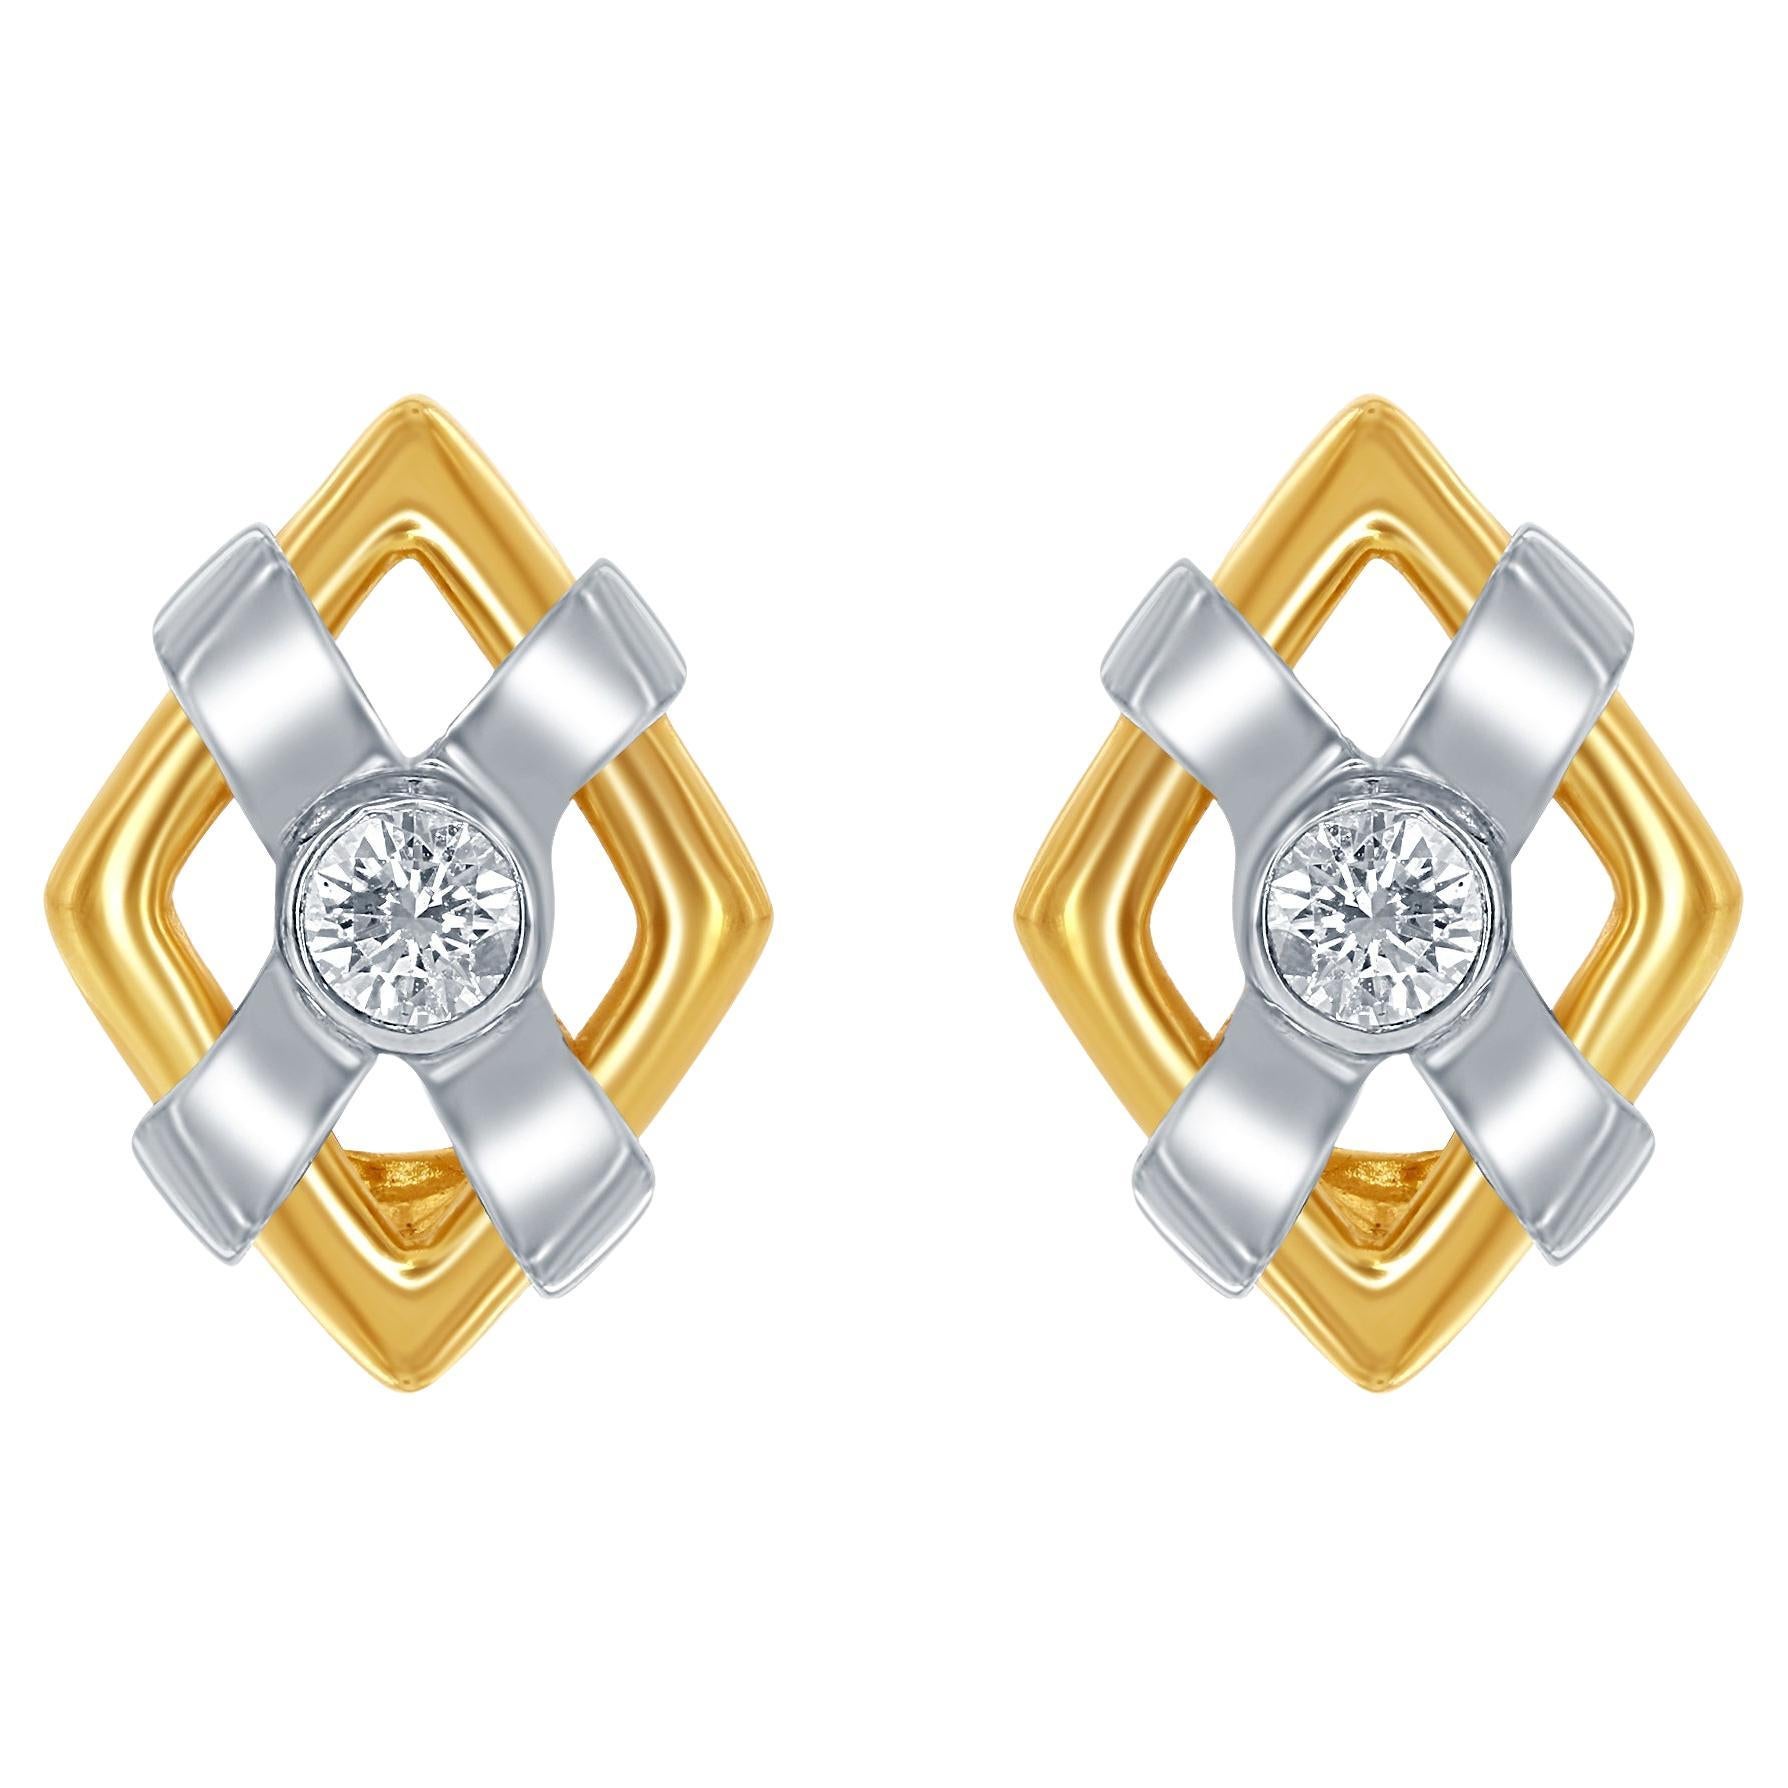 Diana M. 14 kt White and Yellow Gold Diamond Earrings Containing 0.50 cts  For Sale